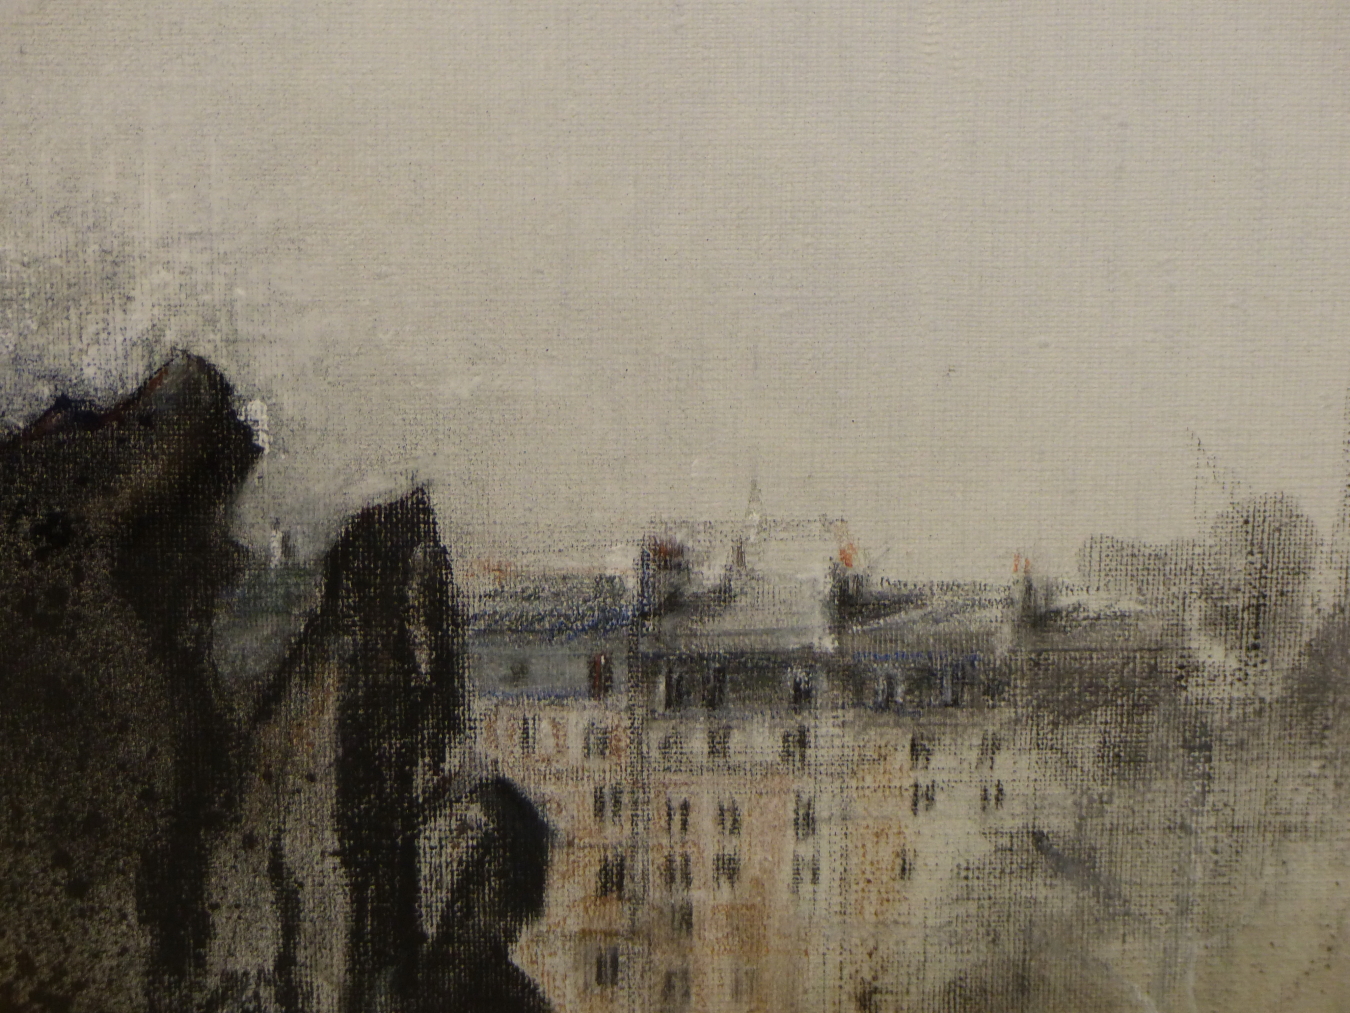 FRENCH SCHOOL (20TH CENTURY), A ROTUNDA ON A CLIFF TOP WITH A CITY BEYOND, OIL ON CANVAS, 58 X - Image 5 of 6